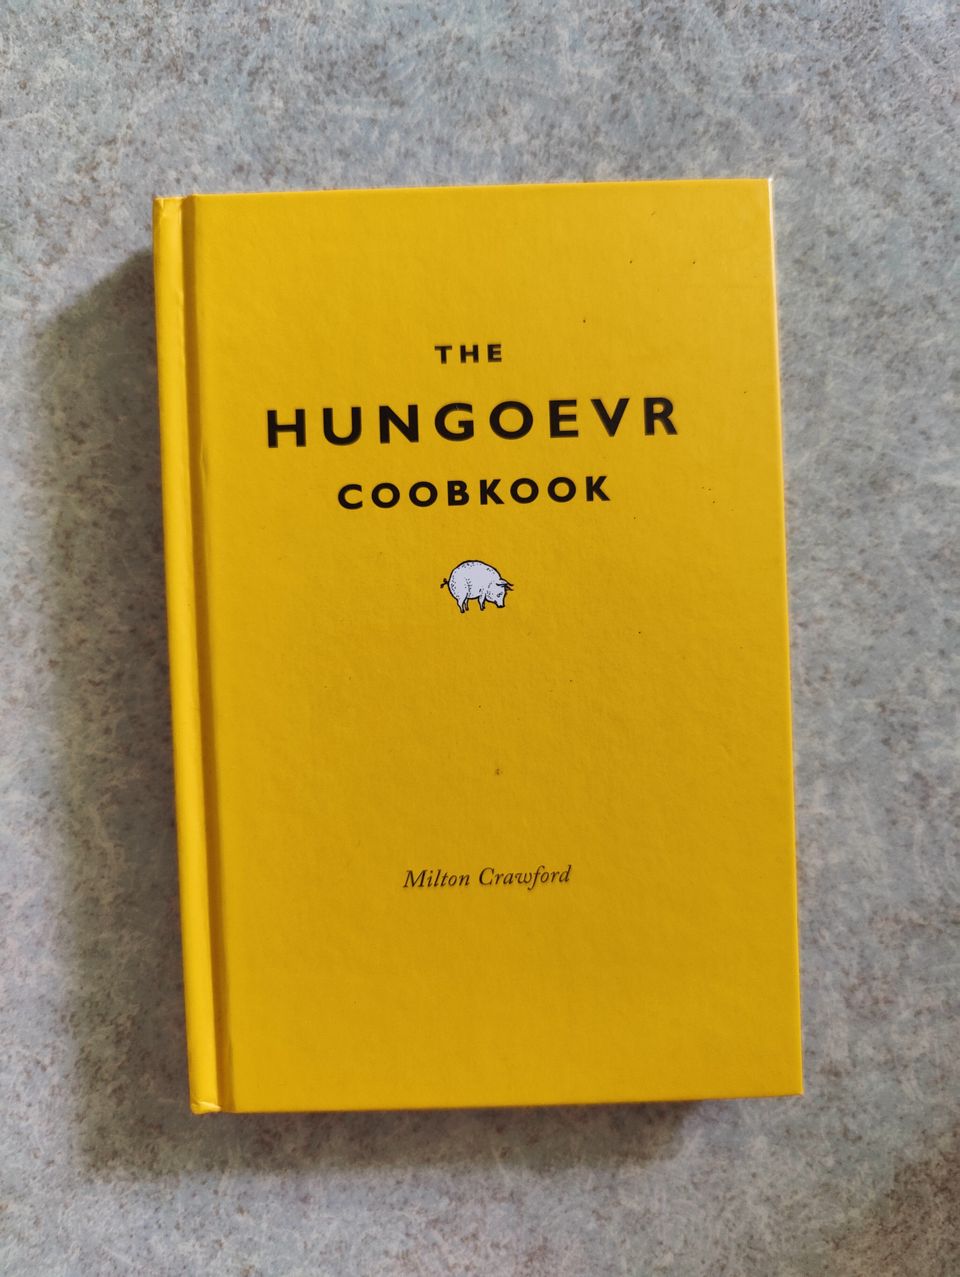 The Hungoevr Coobkook